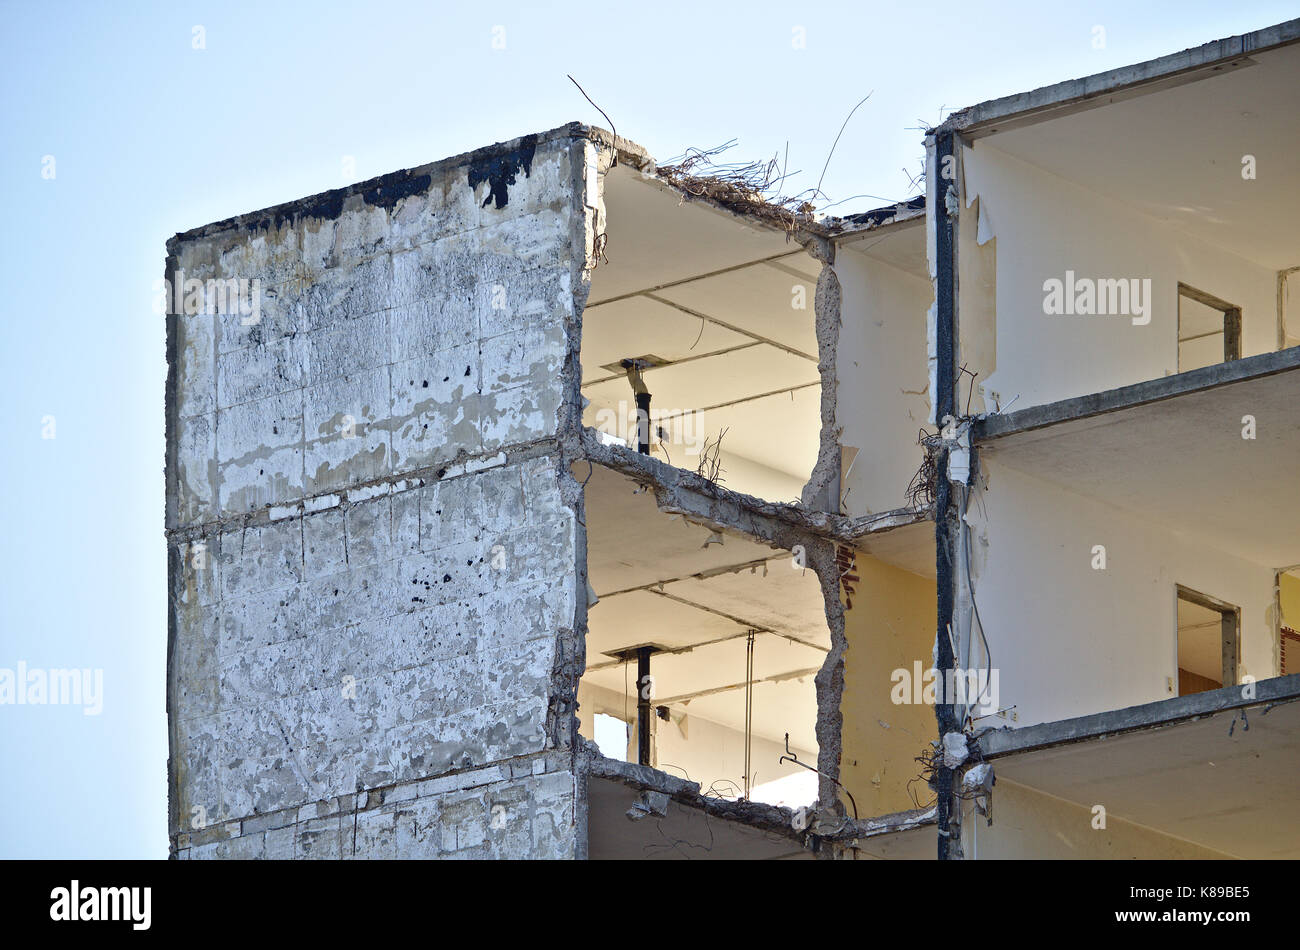 Upper floor of a derelict residential building in the process of being demolished with large holes in the walls Stock Photo